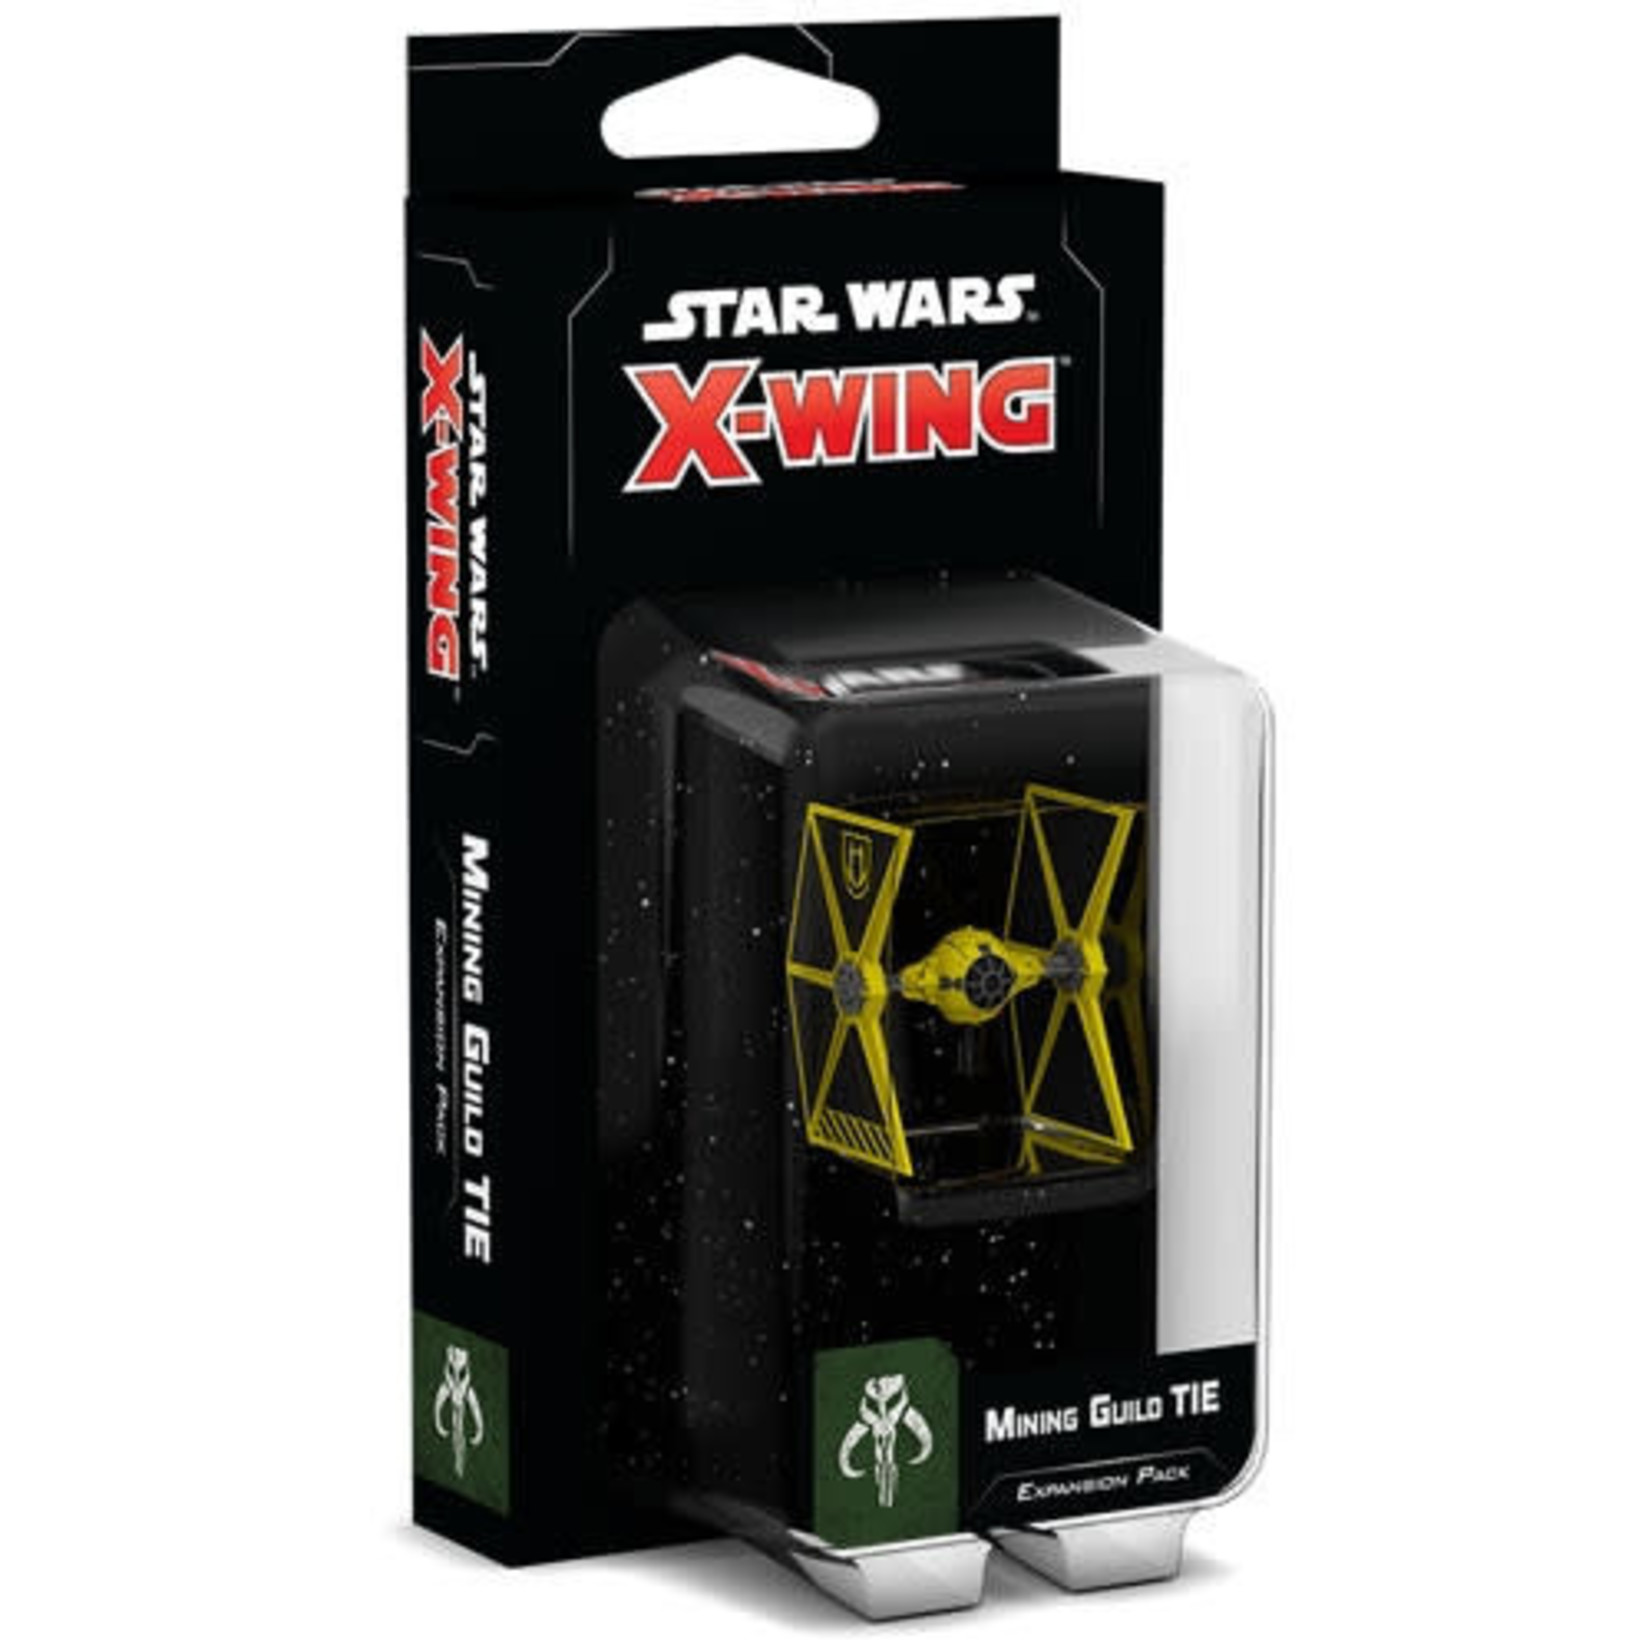 Star Wars X-Wing 2e: Mining Guild TIE Expansion Pack